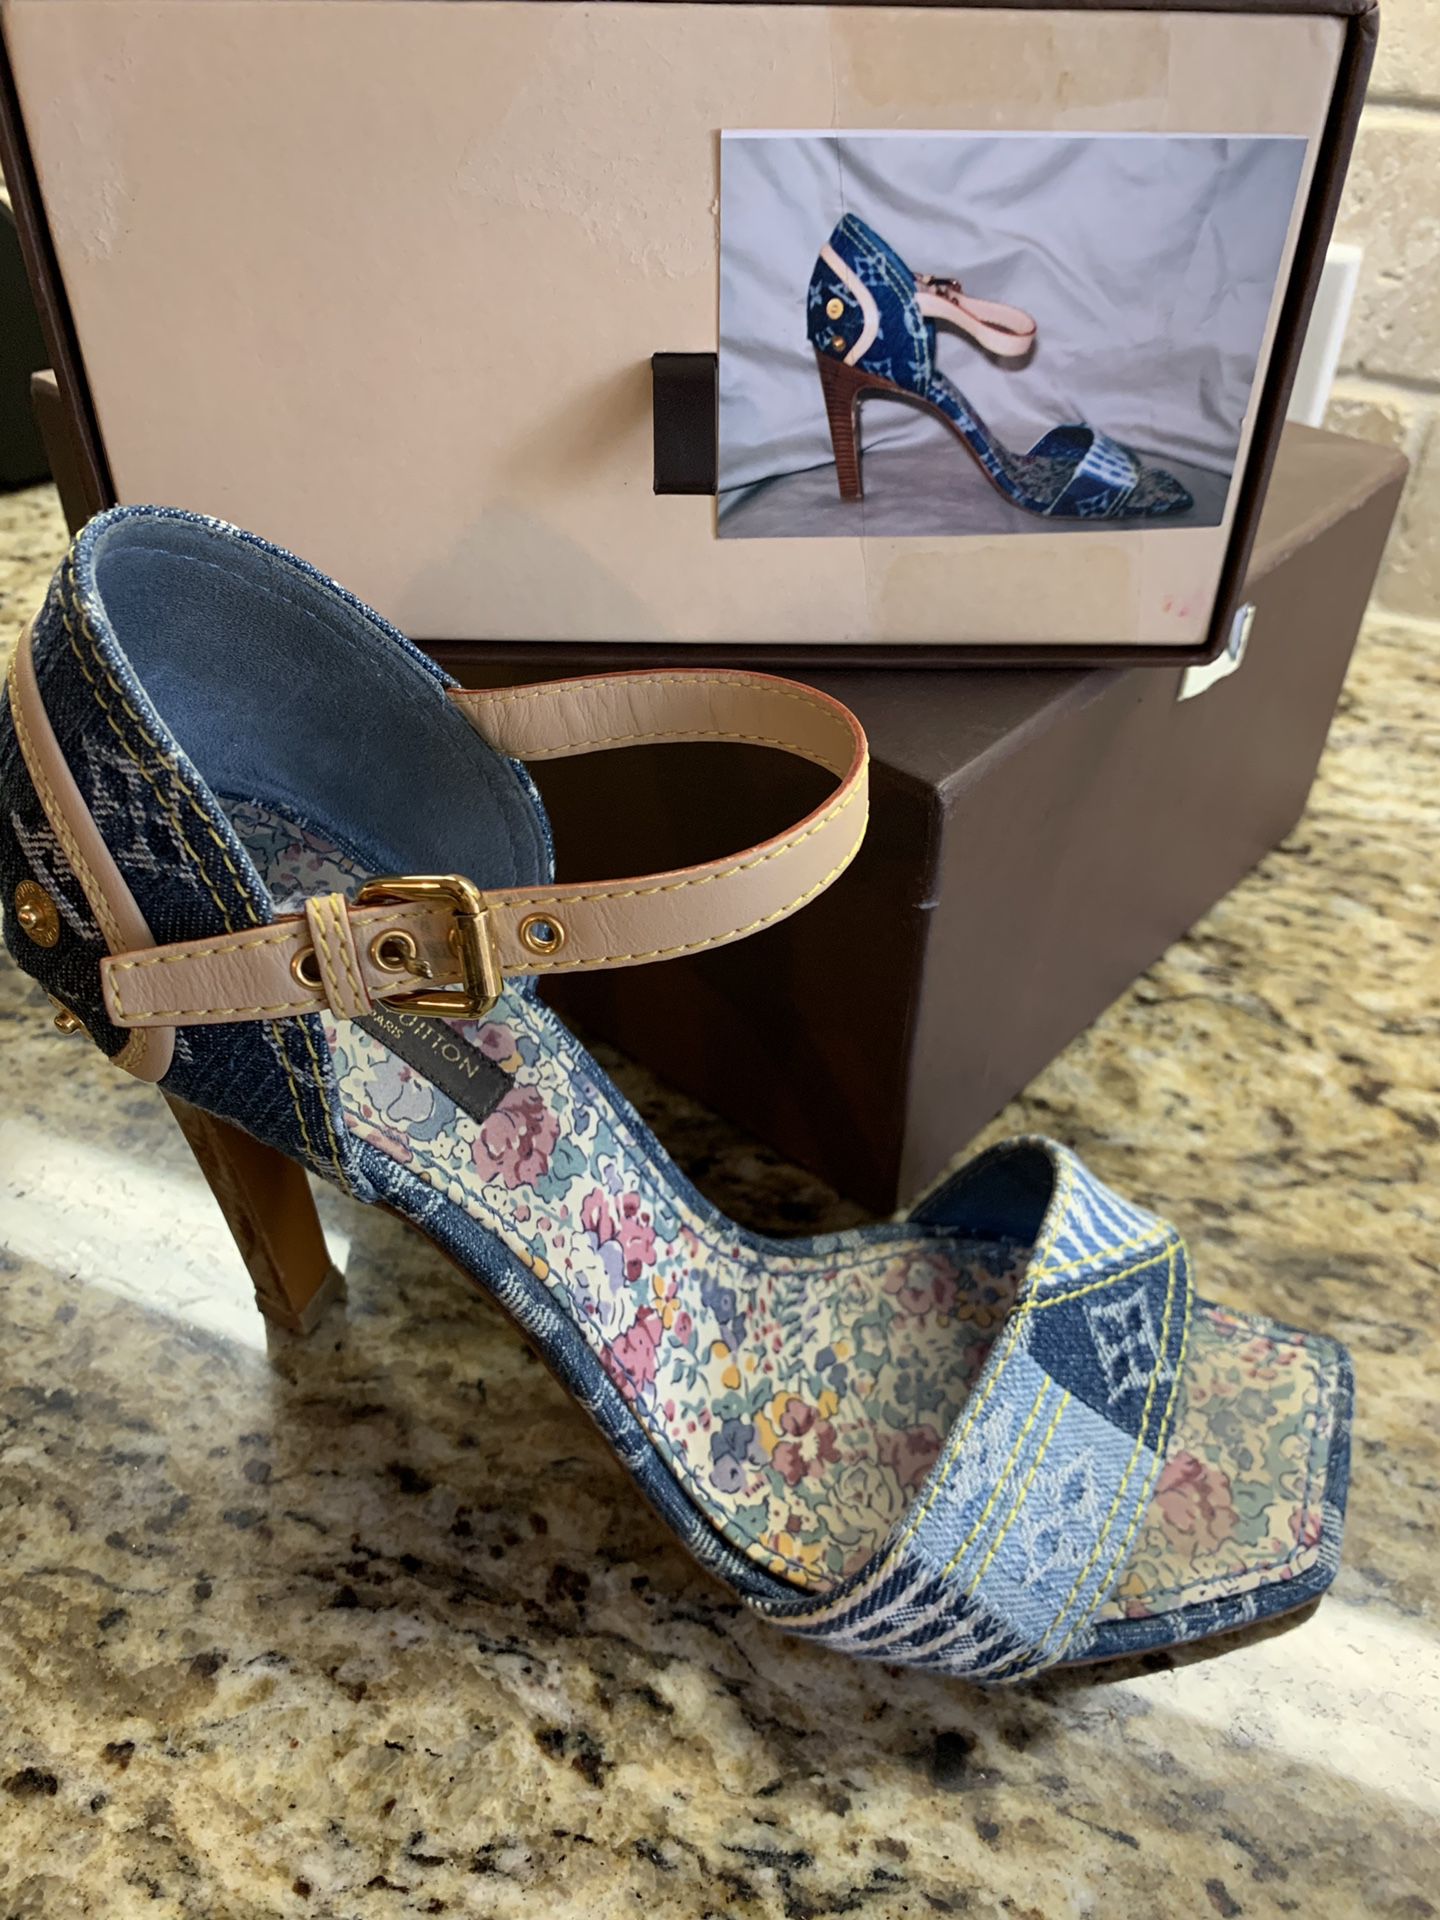 LOUIS VUITTON DENIM PEEP-TOE PLATFORM HEELS, IN BOX WITH SHOE BAG -  clothing & accessories - by owner - apparel sale 